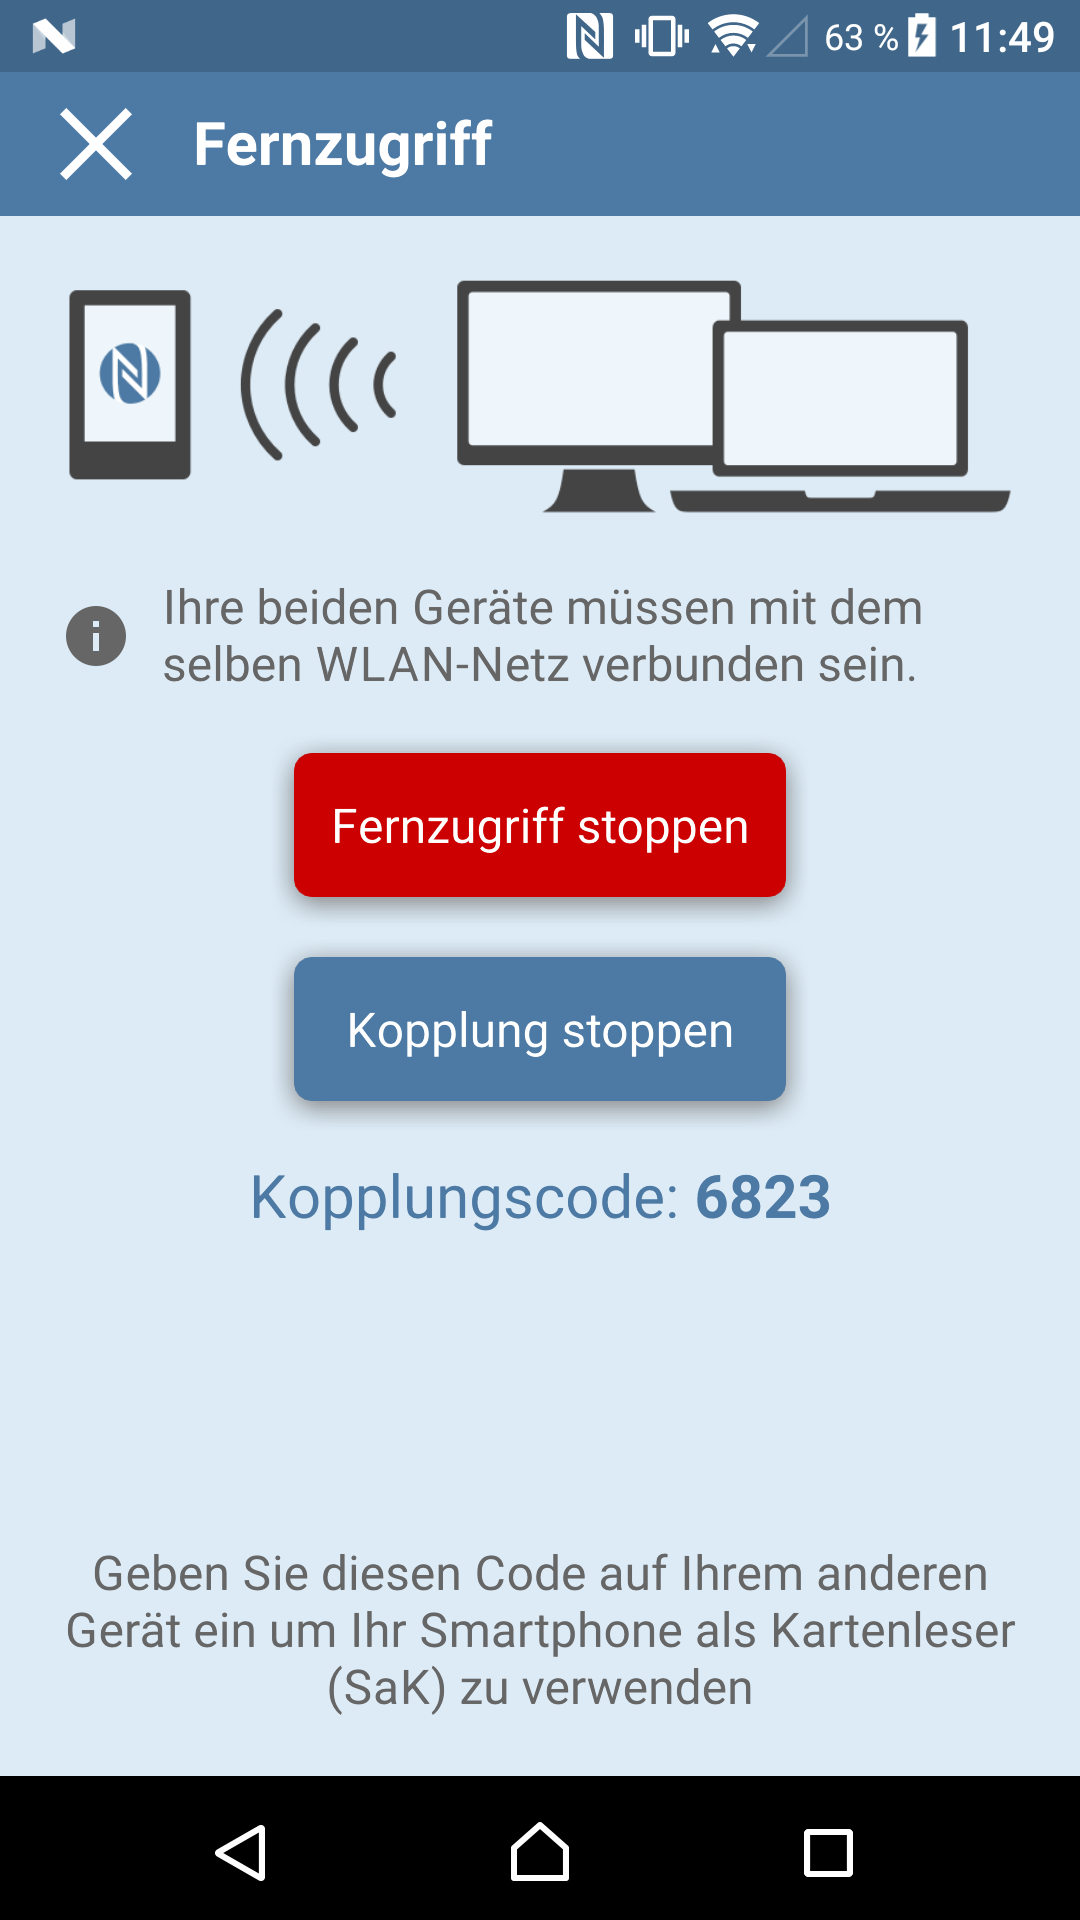 _images/Kopplung-06-android-fernzugriff-kopplungscode.png